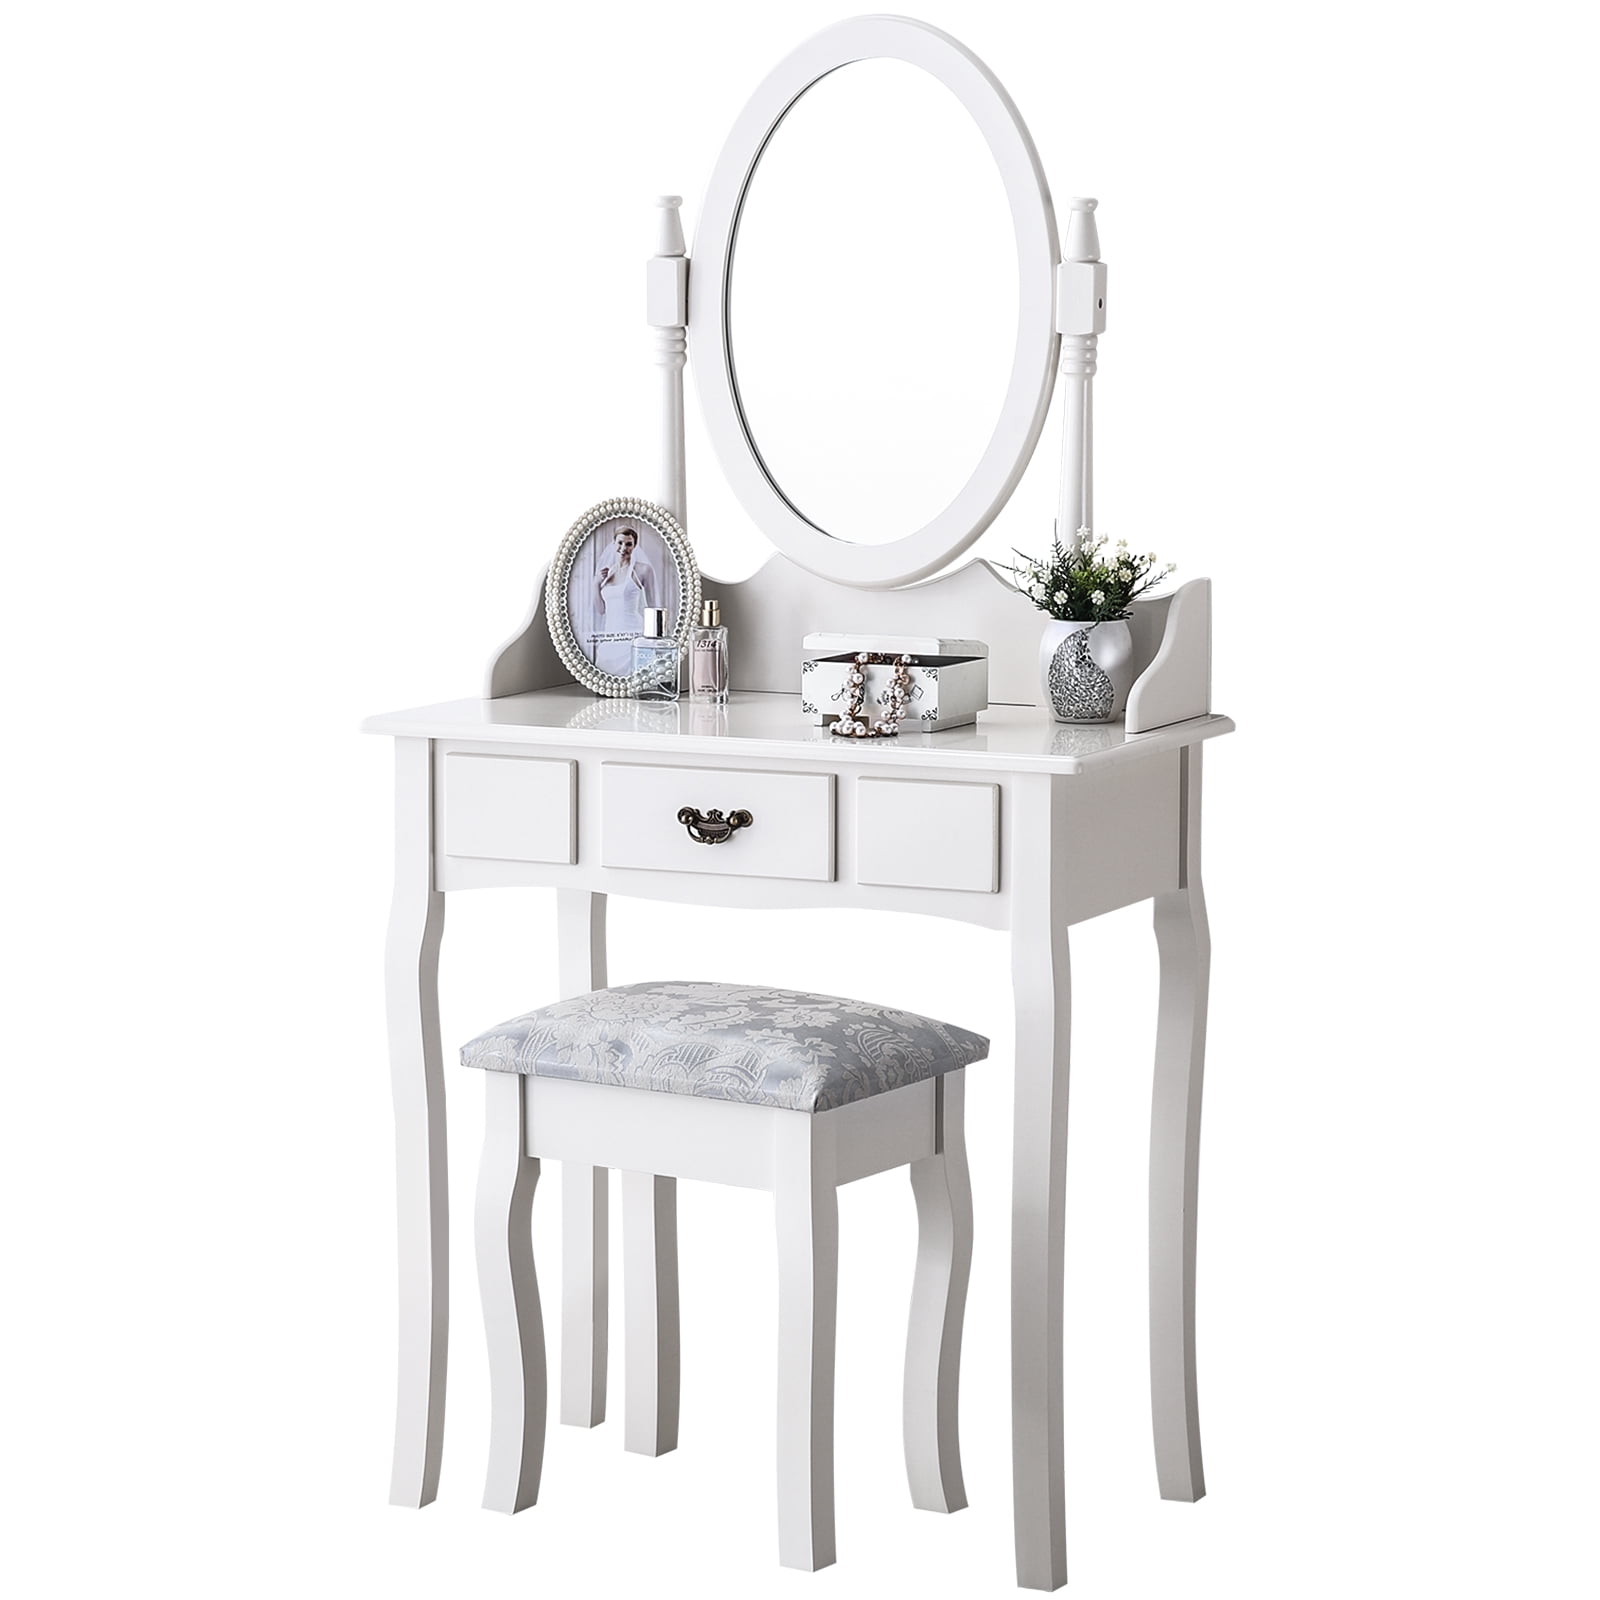 Drssing Tables Set with 4 Drawers White Vanity Table Set wirh 3 Mirrors mecor Dressing Tables with Stool Makeup Dressing Table for Bedroom